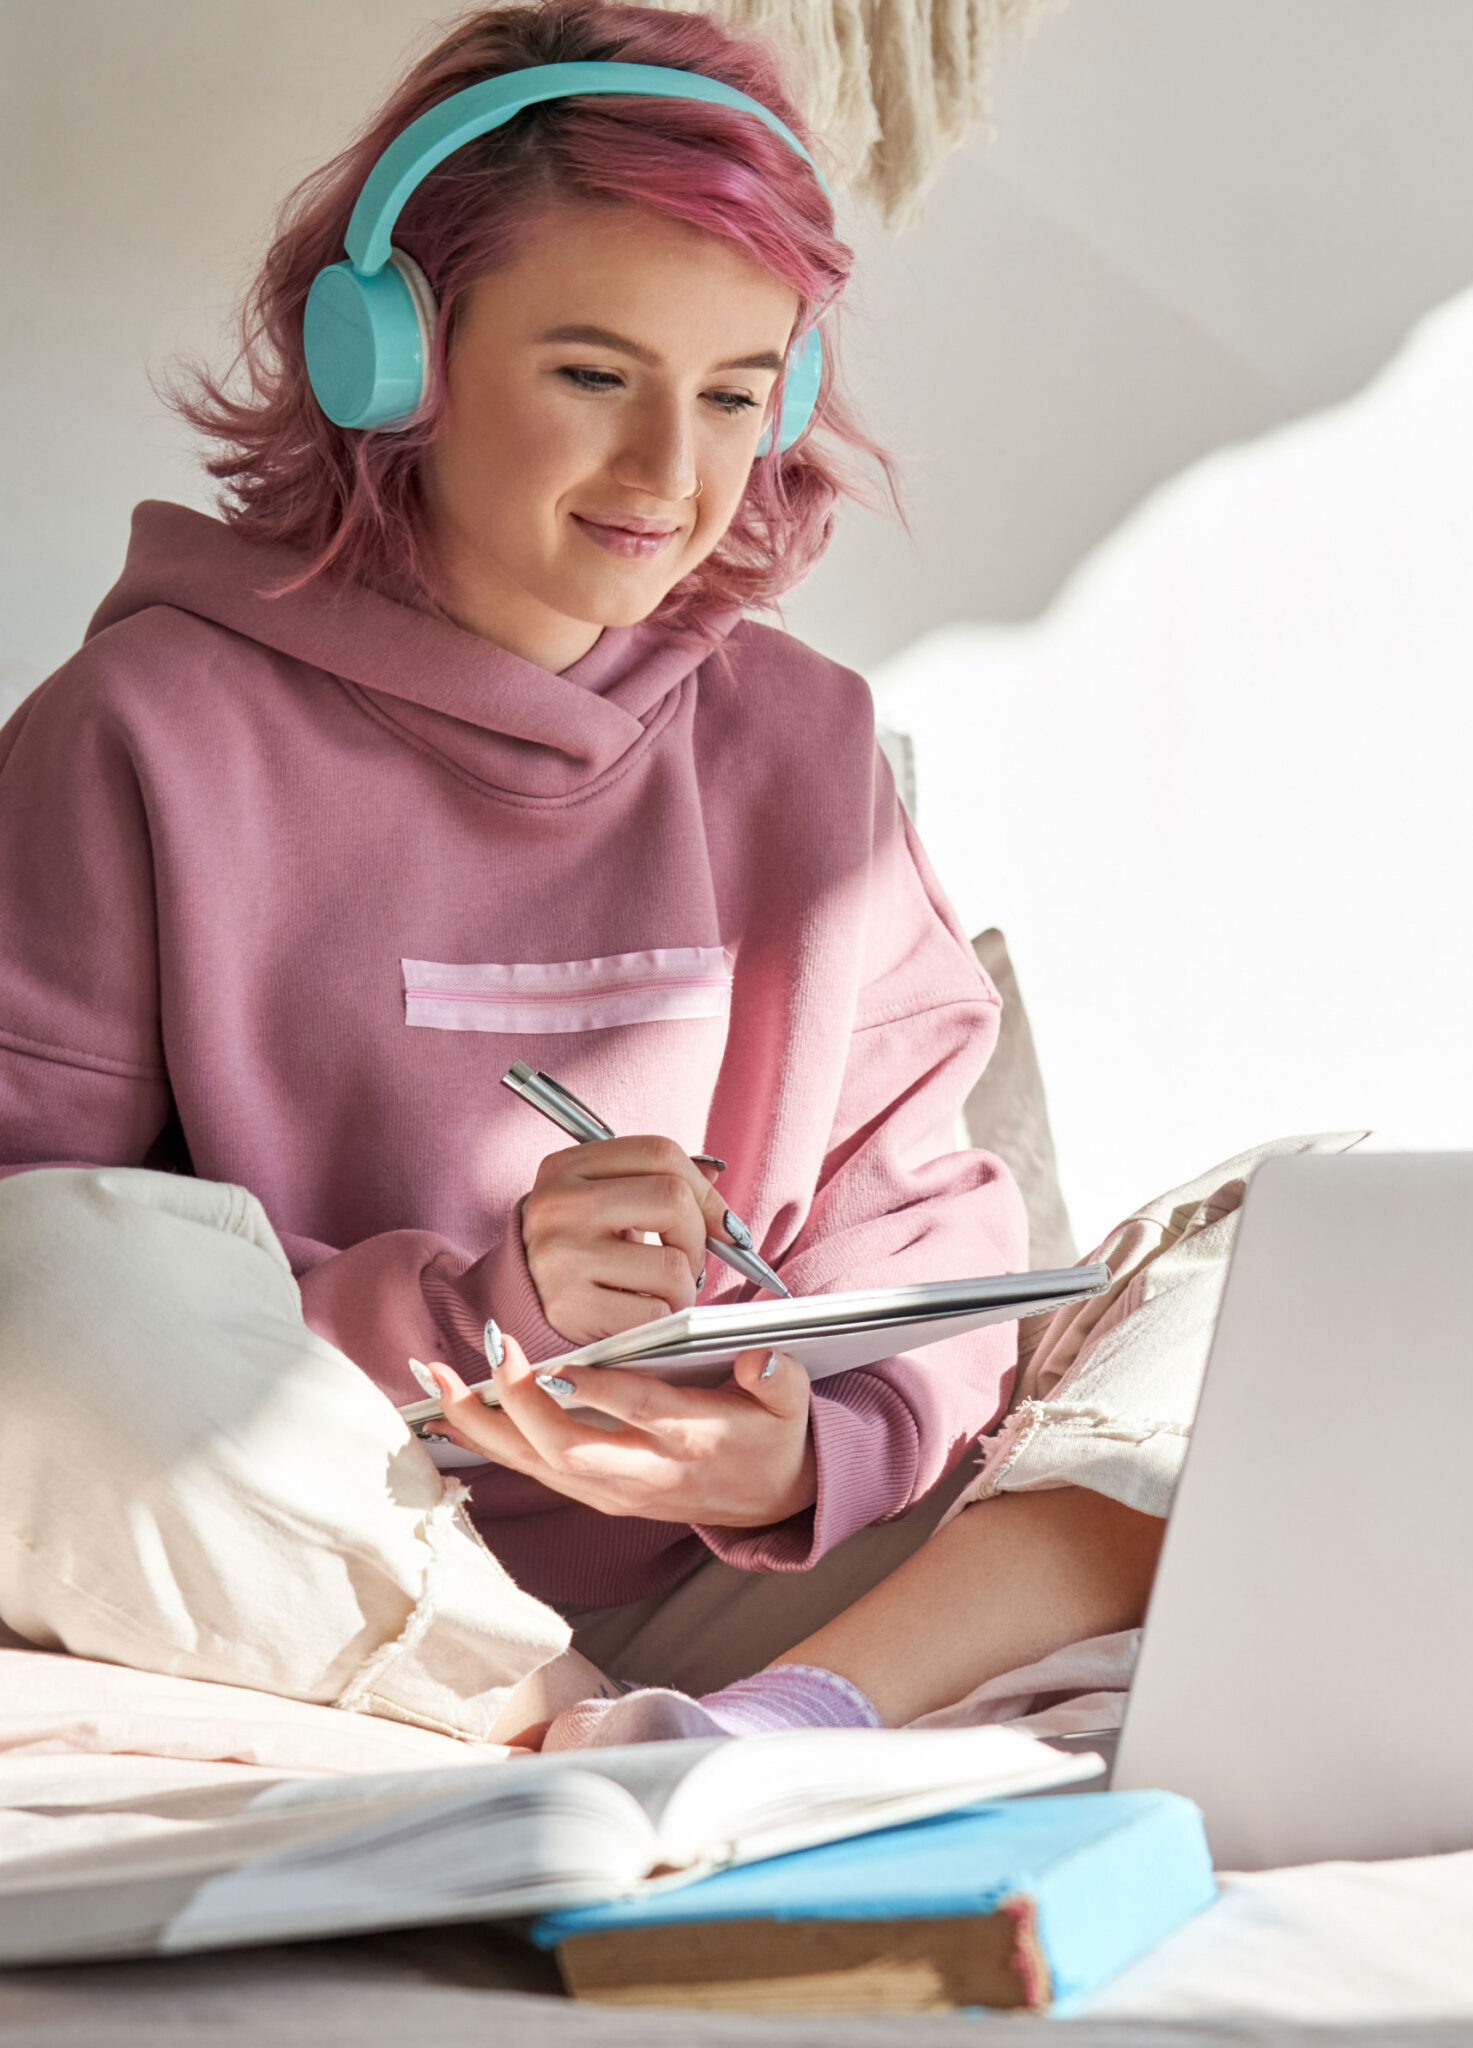 Teenage girl with pink hair and blue headphones sits on her bed working on computer,